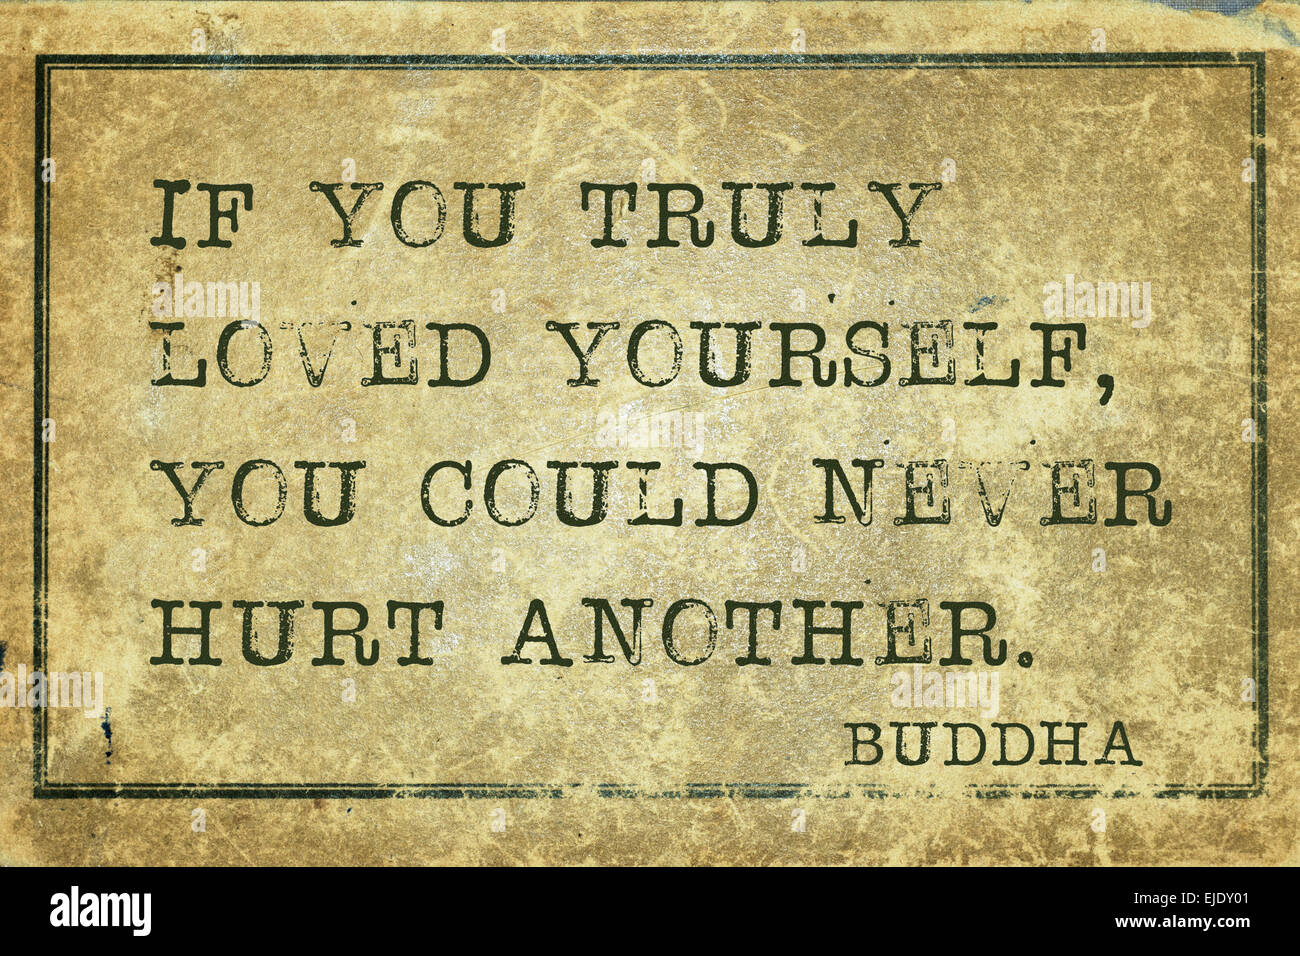 If you truly loved yourself - famous Buddha quote printed on grunge vintage cardboard Stock Photo